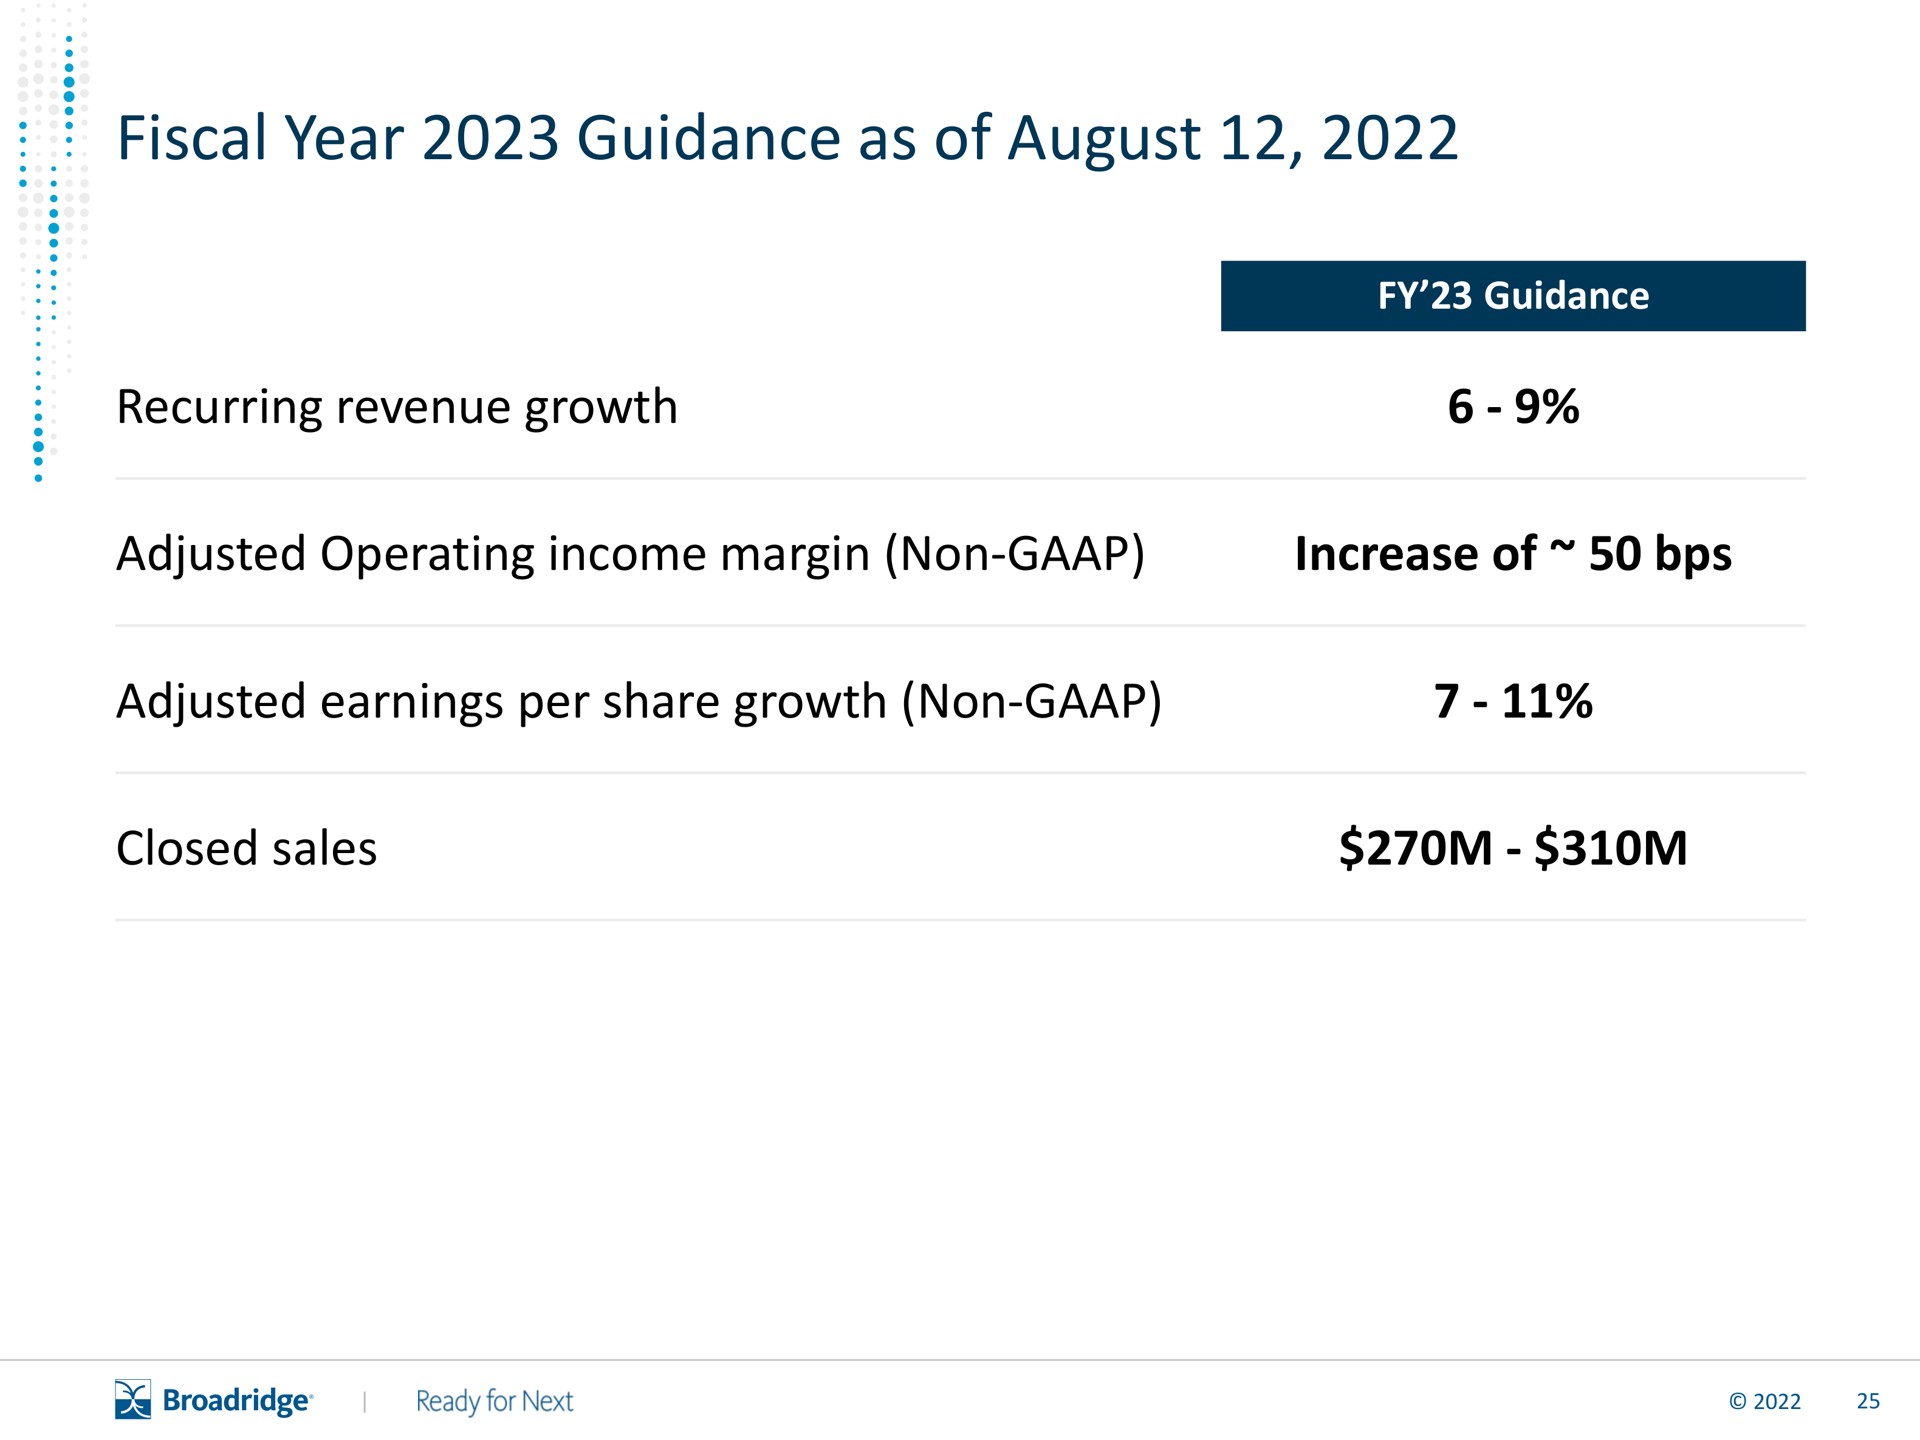 fiscal year guidance as of august | Broadridge Financial Solutions